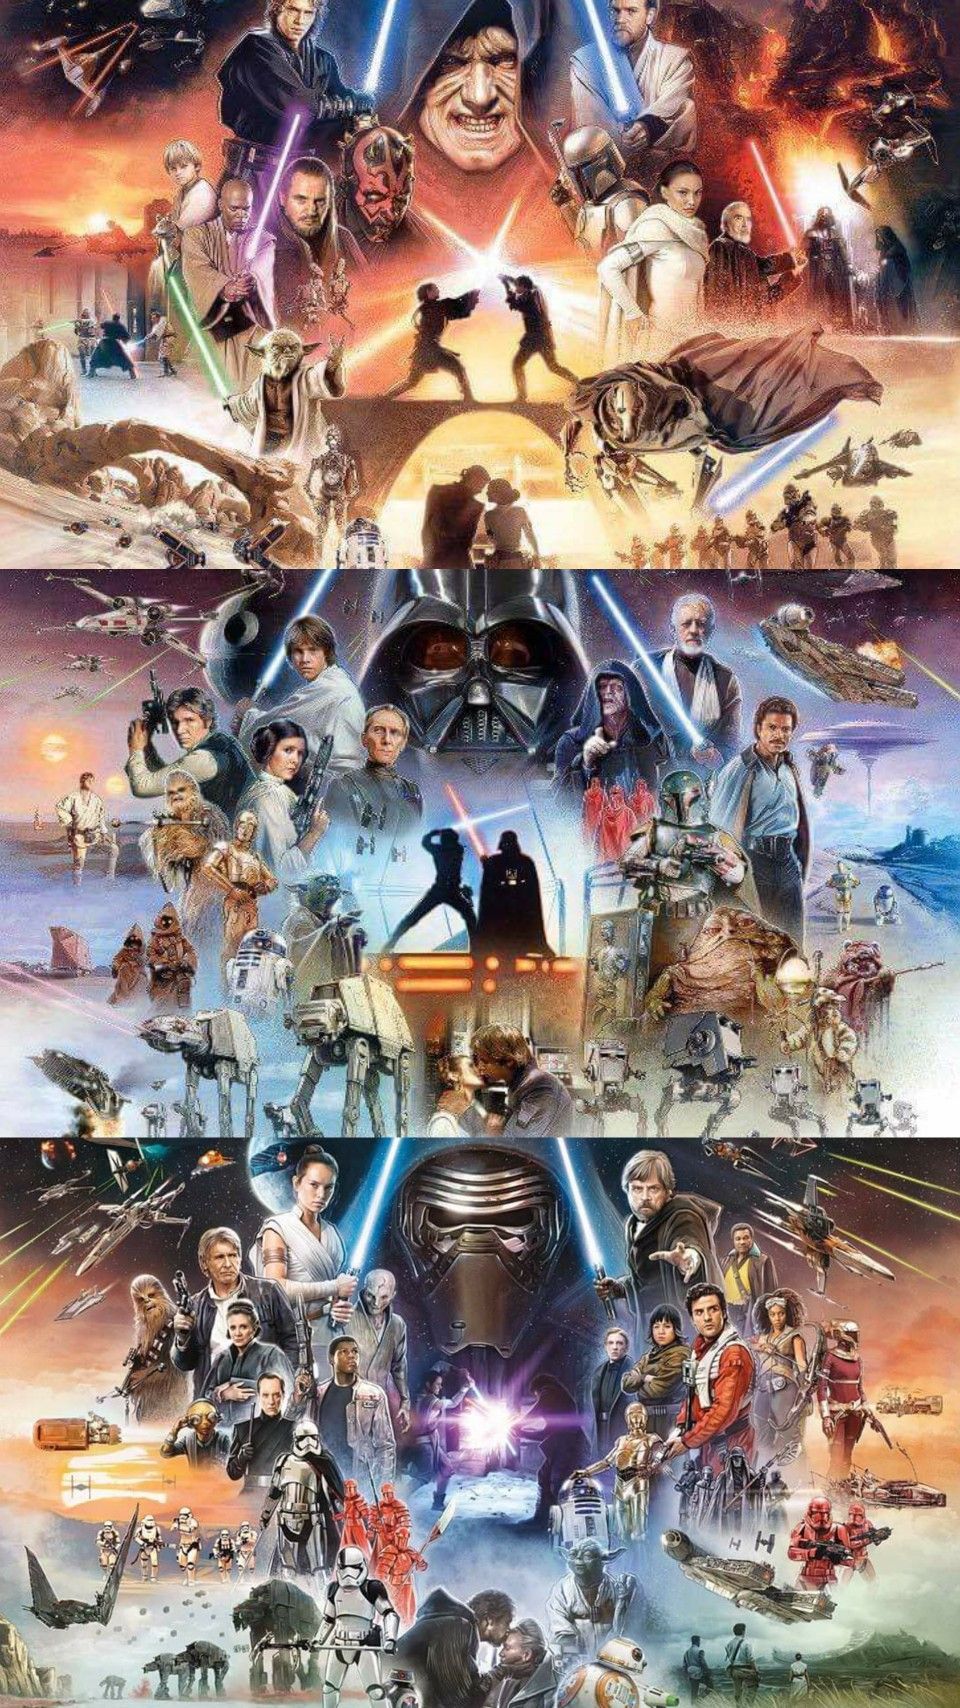 The Original Trilogy. The Prequel Trilogy. The Sequel Trilogy. The Star Wars Saga. Star wars art, Star wars poster, Star wars wallpaper